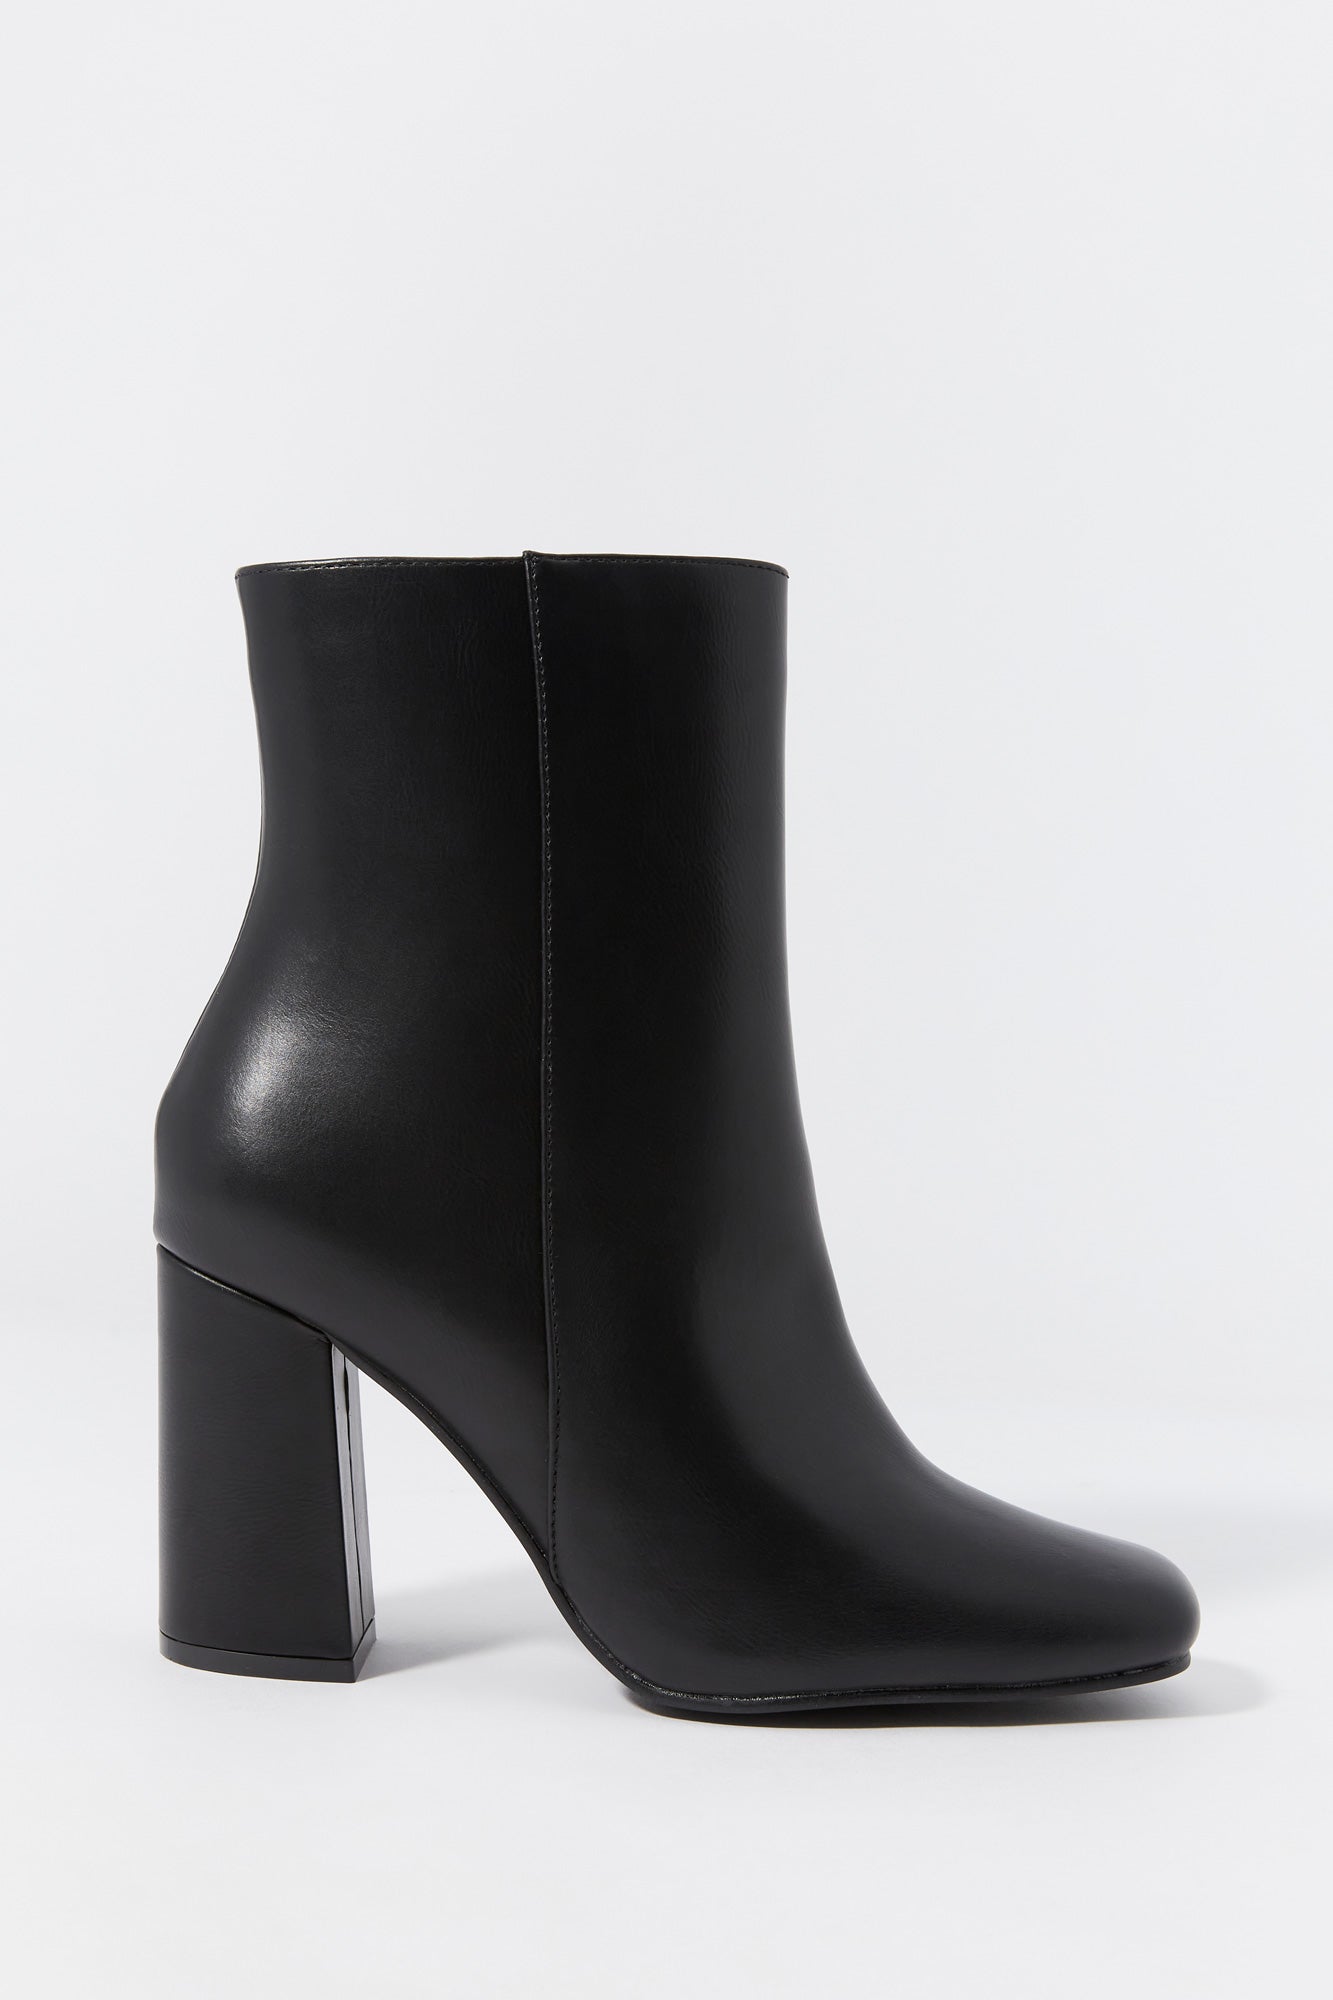 Faux Leather Square Toe Heeled Boot